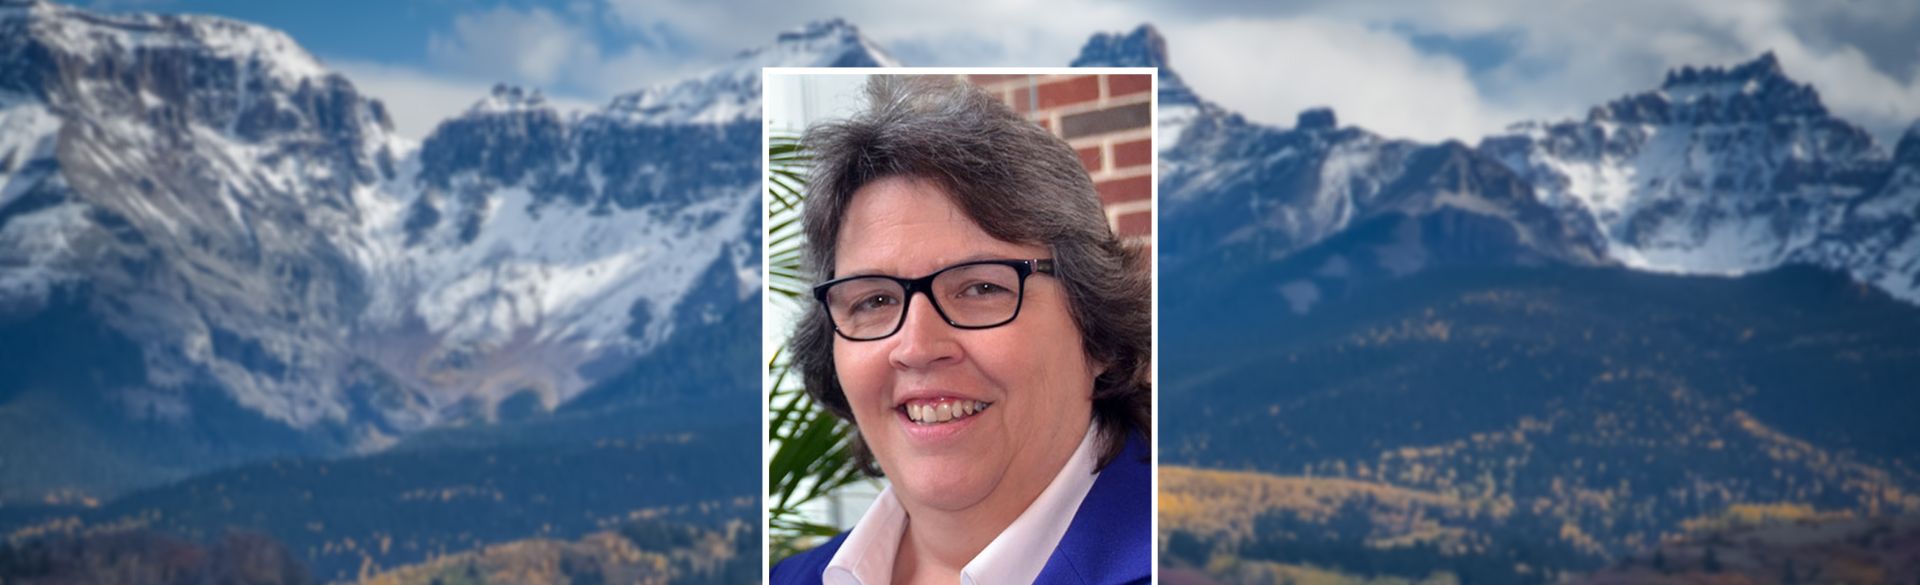 Dr. Laura Linnan with mountain background